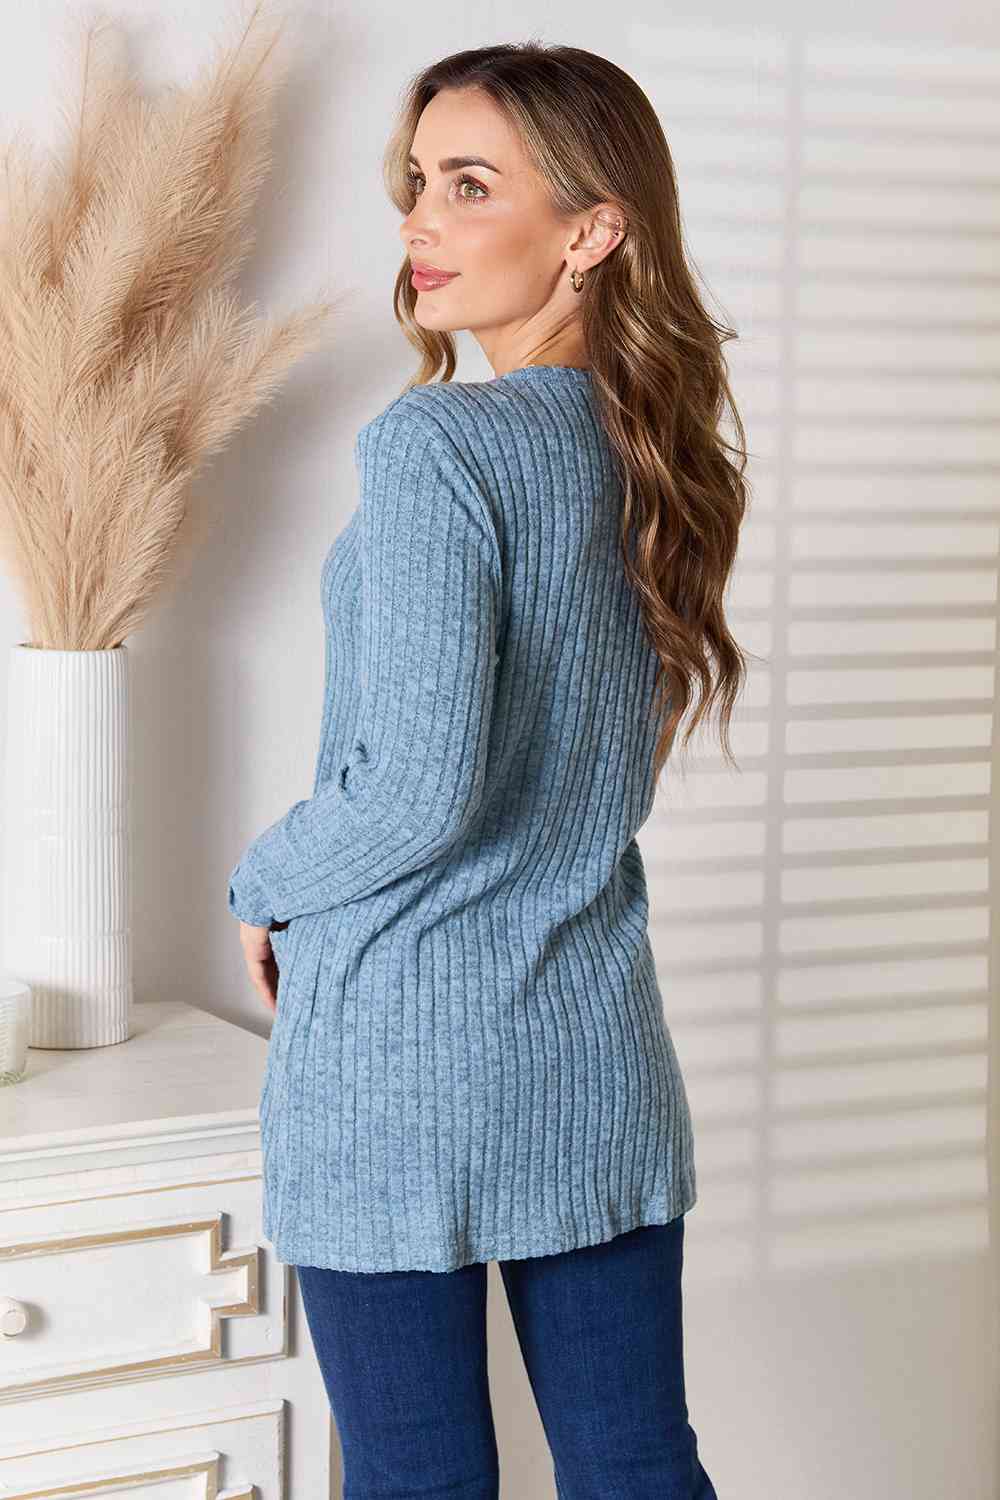 Ribbed Button-Up Cardigan with Pockets - Women’s Clothing & Accessories - Shirts & Tops - 12 - 2024